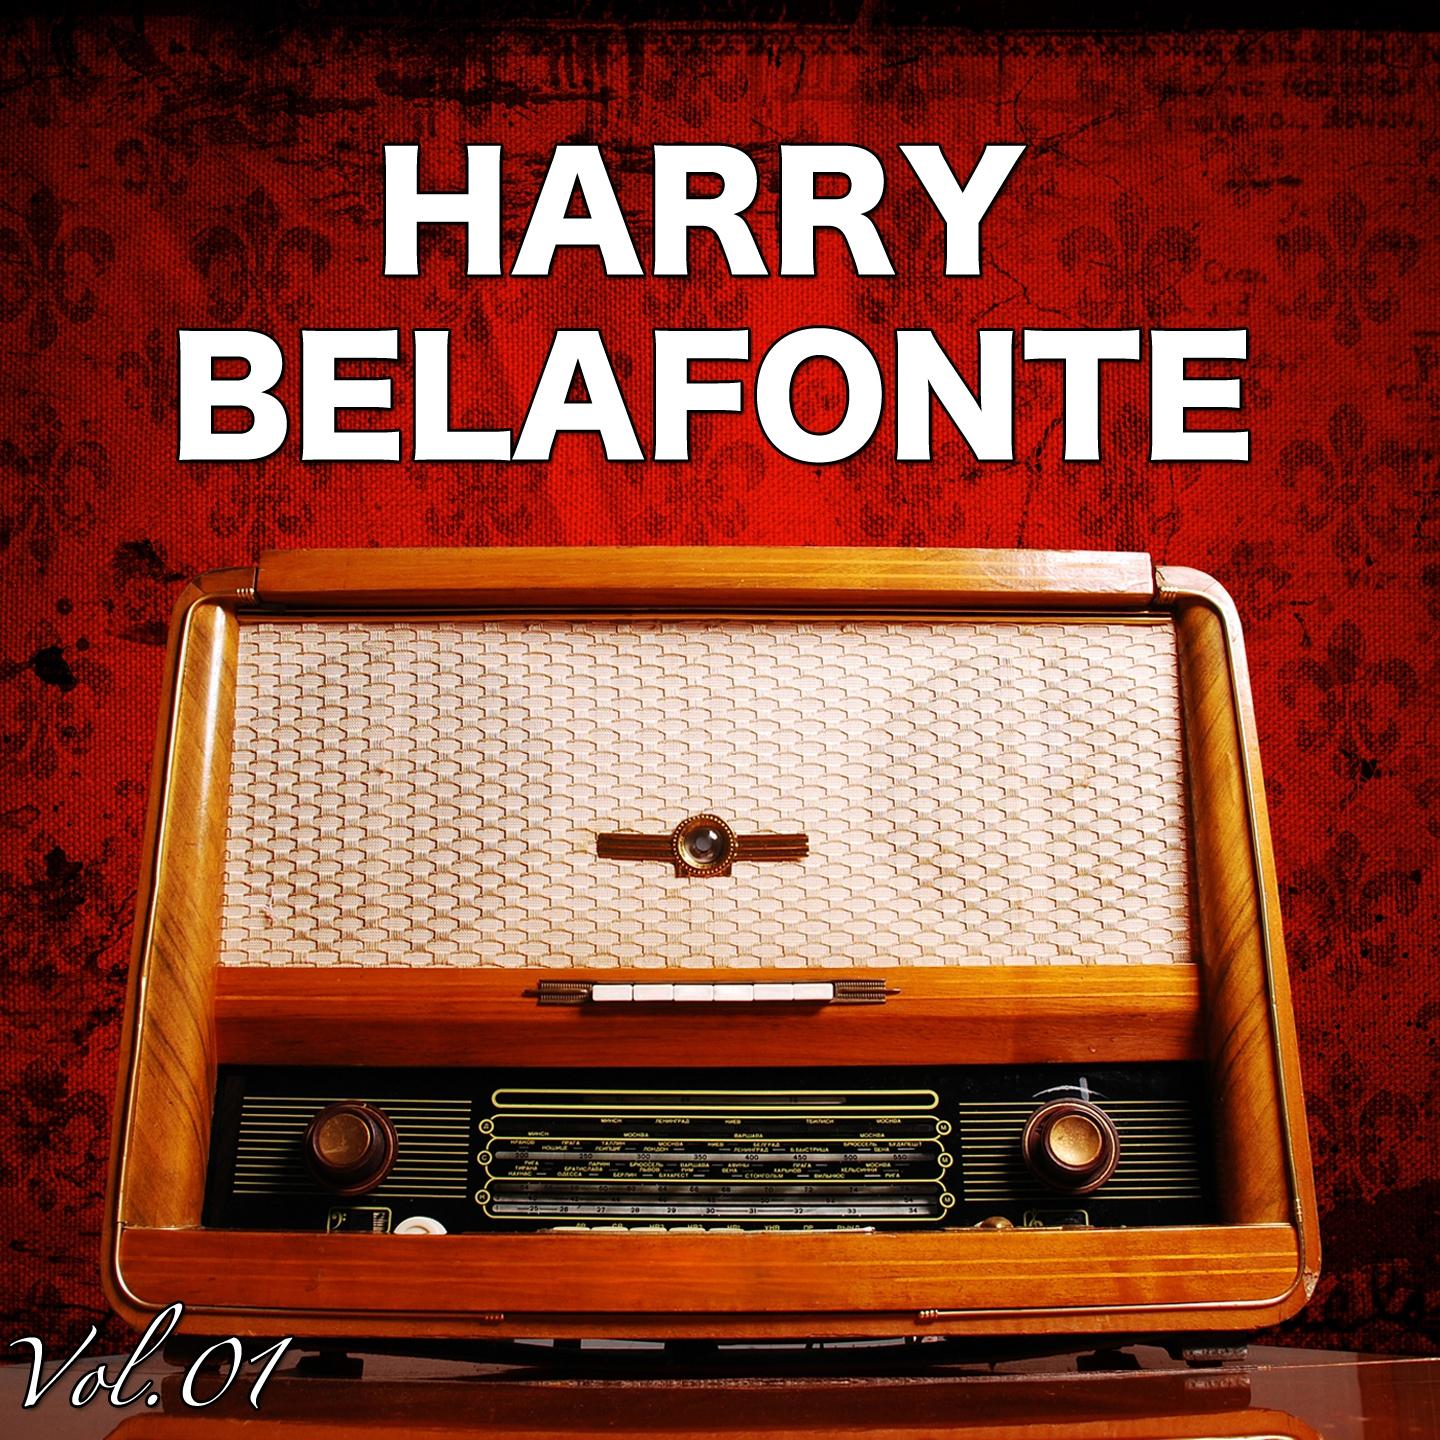 H.o.t.s Presents : The Very Best of Harry Bellafonte, Vol. 1